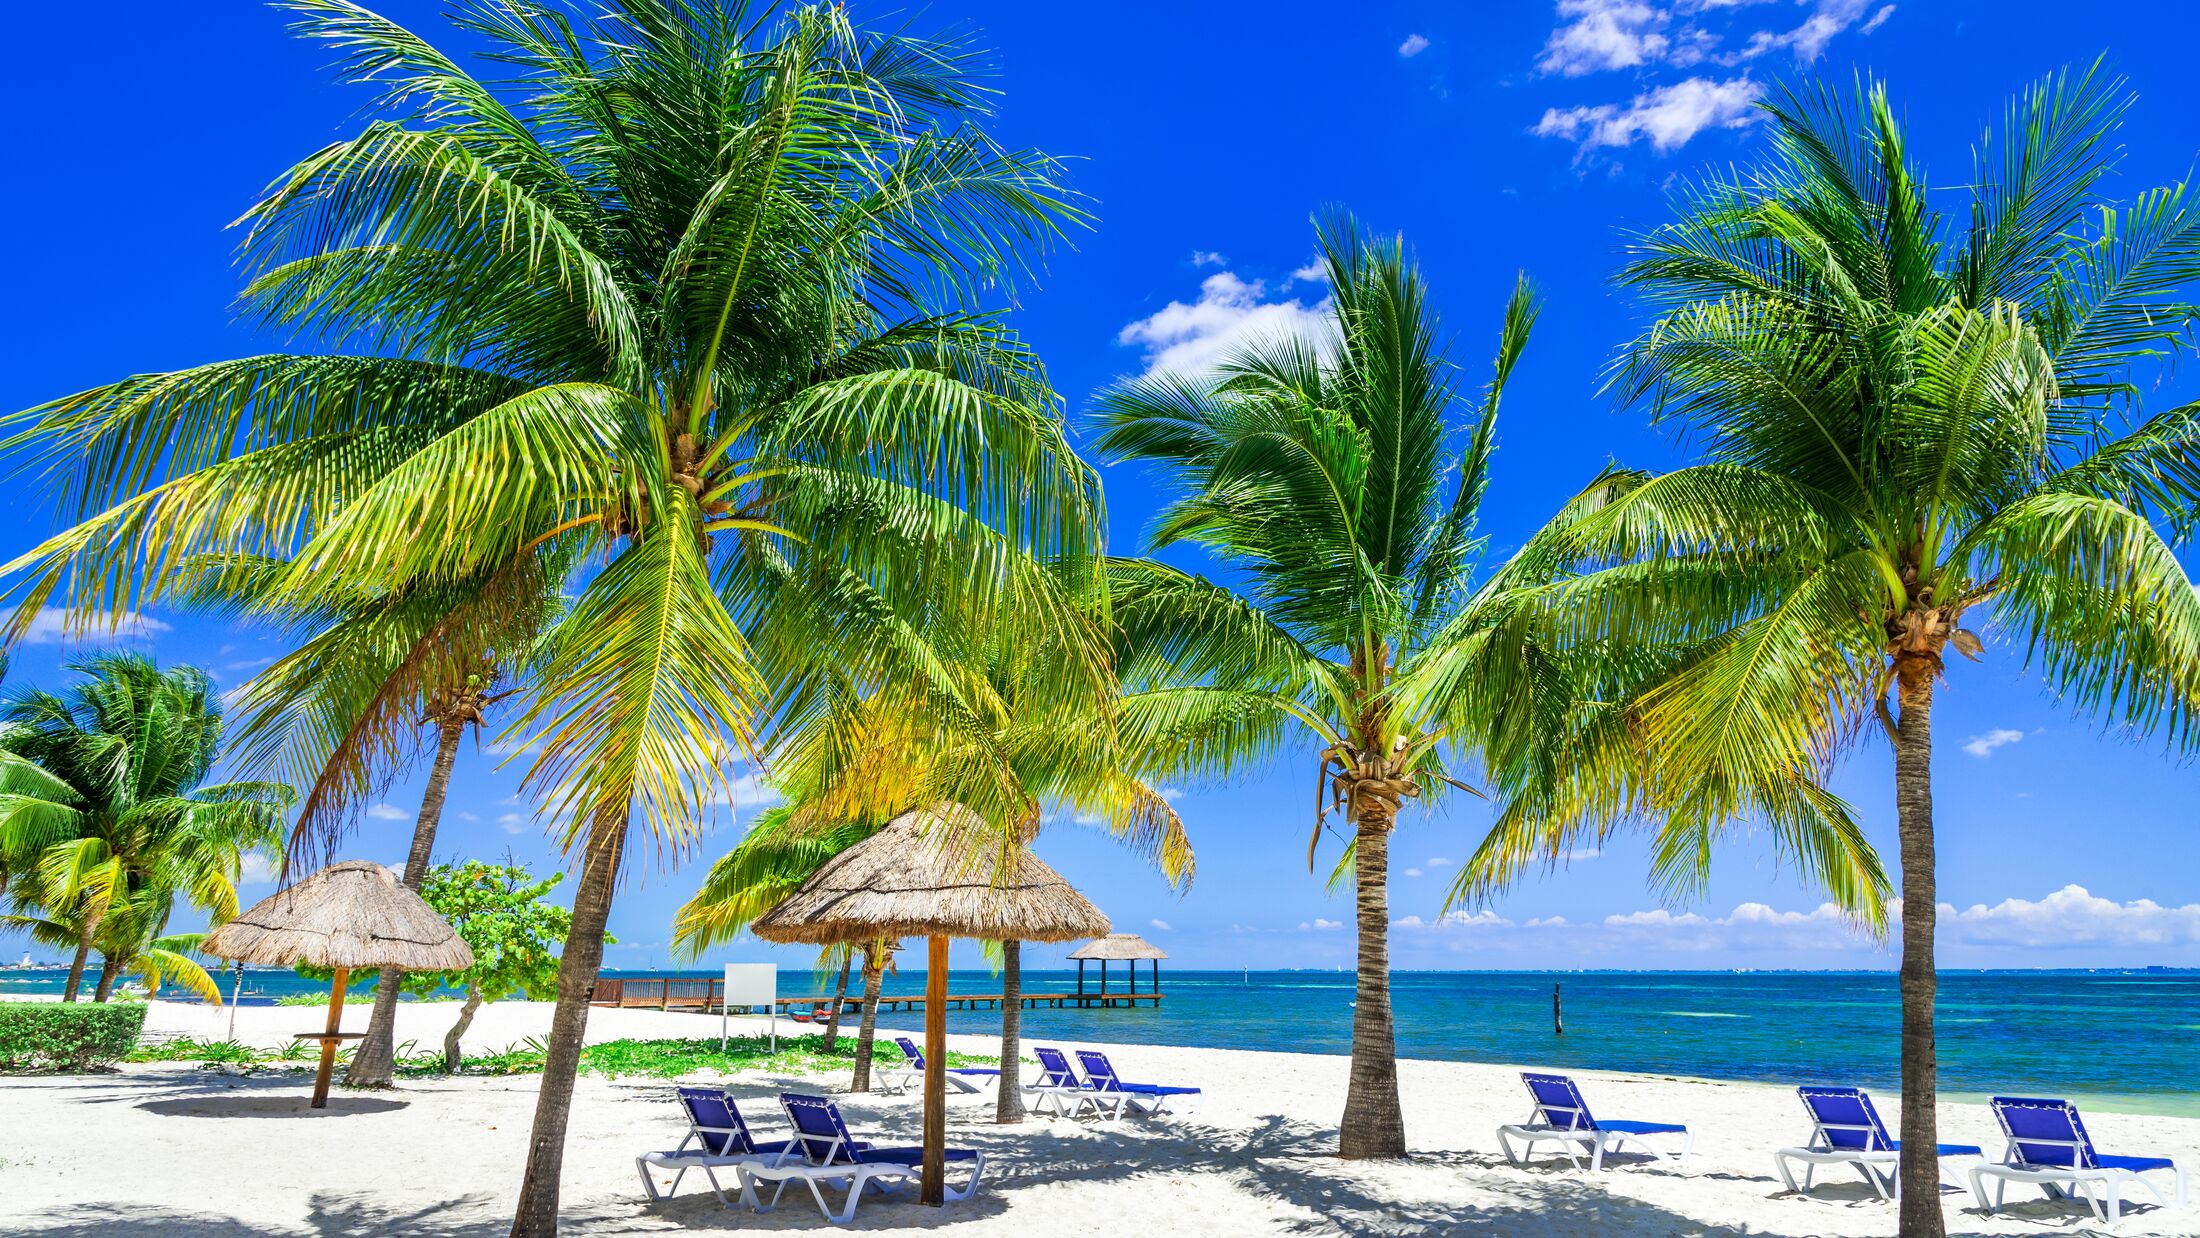 Tropical landscape with coconut palm on caribbean beach, Cancun, Yucatan Peninsula in Mexico.